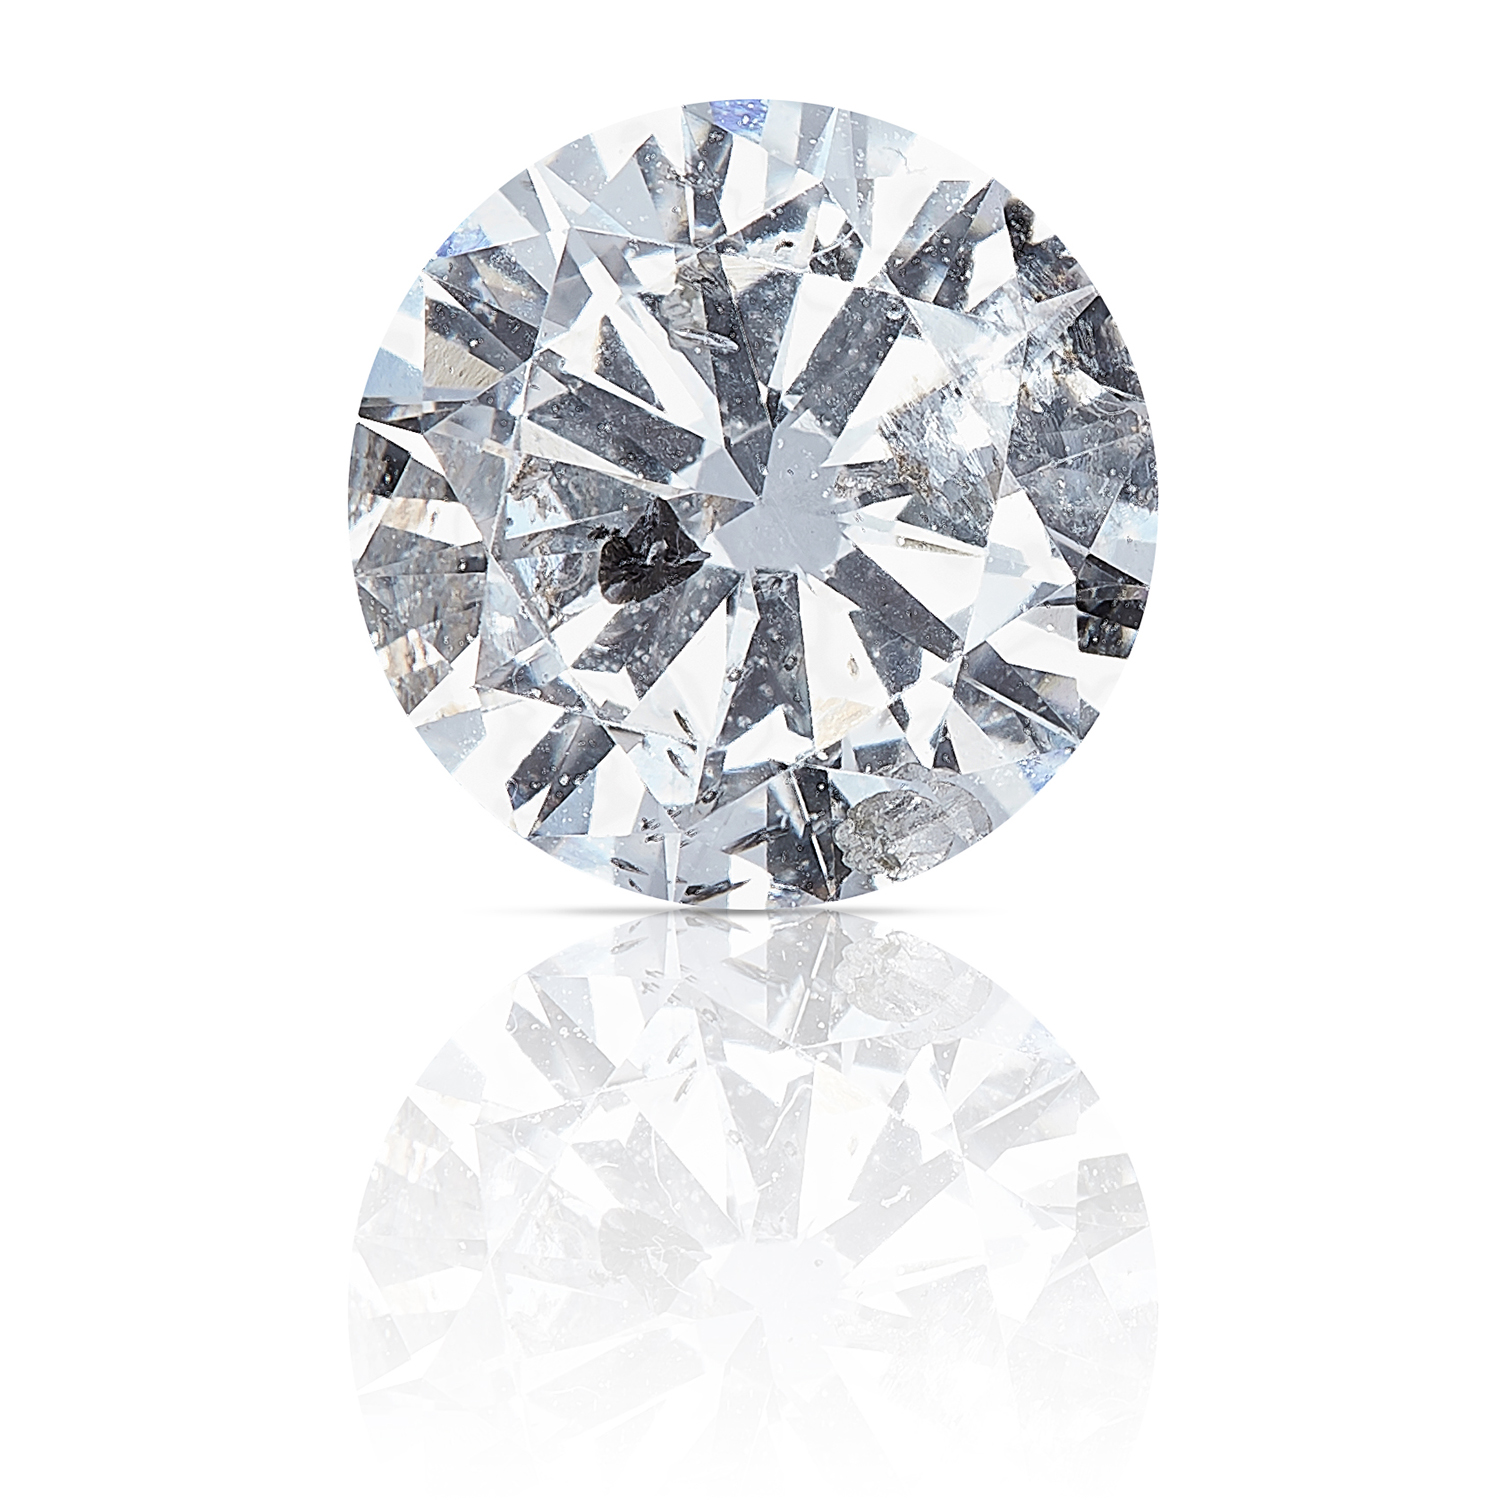 A ROUND CUT MODERN BRILLIANT DIAMOND TOTALLING 0.79cts, UNMOUNTED.